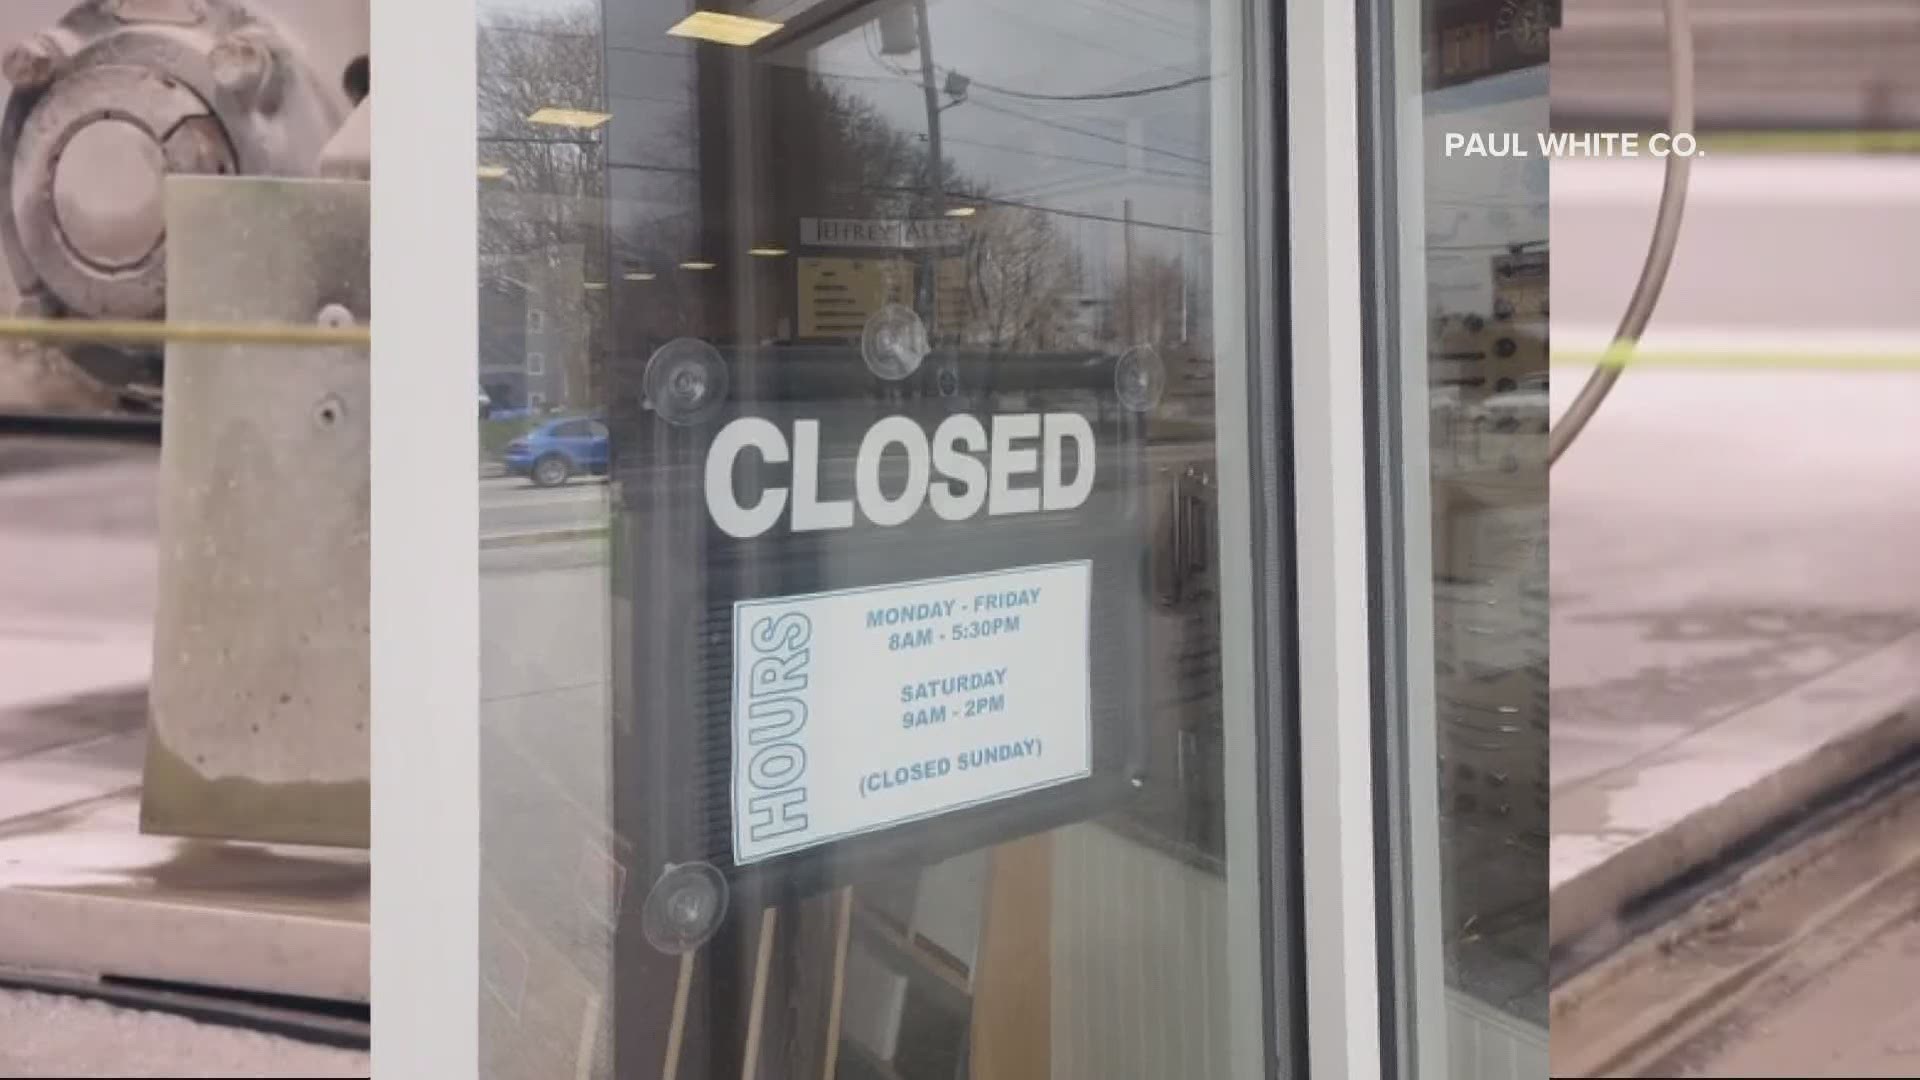 'We have to stop the bleeding': Business owner says Maine economy will be a disaster if more can't open during coronavirus, COVID-19